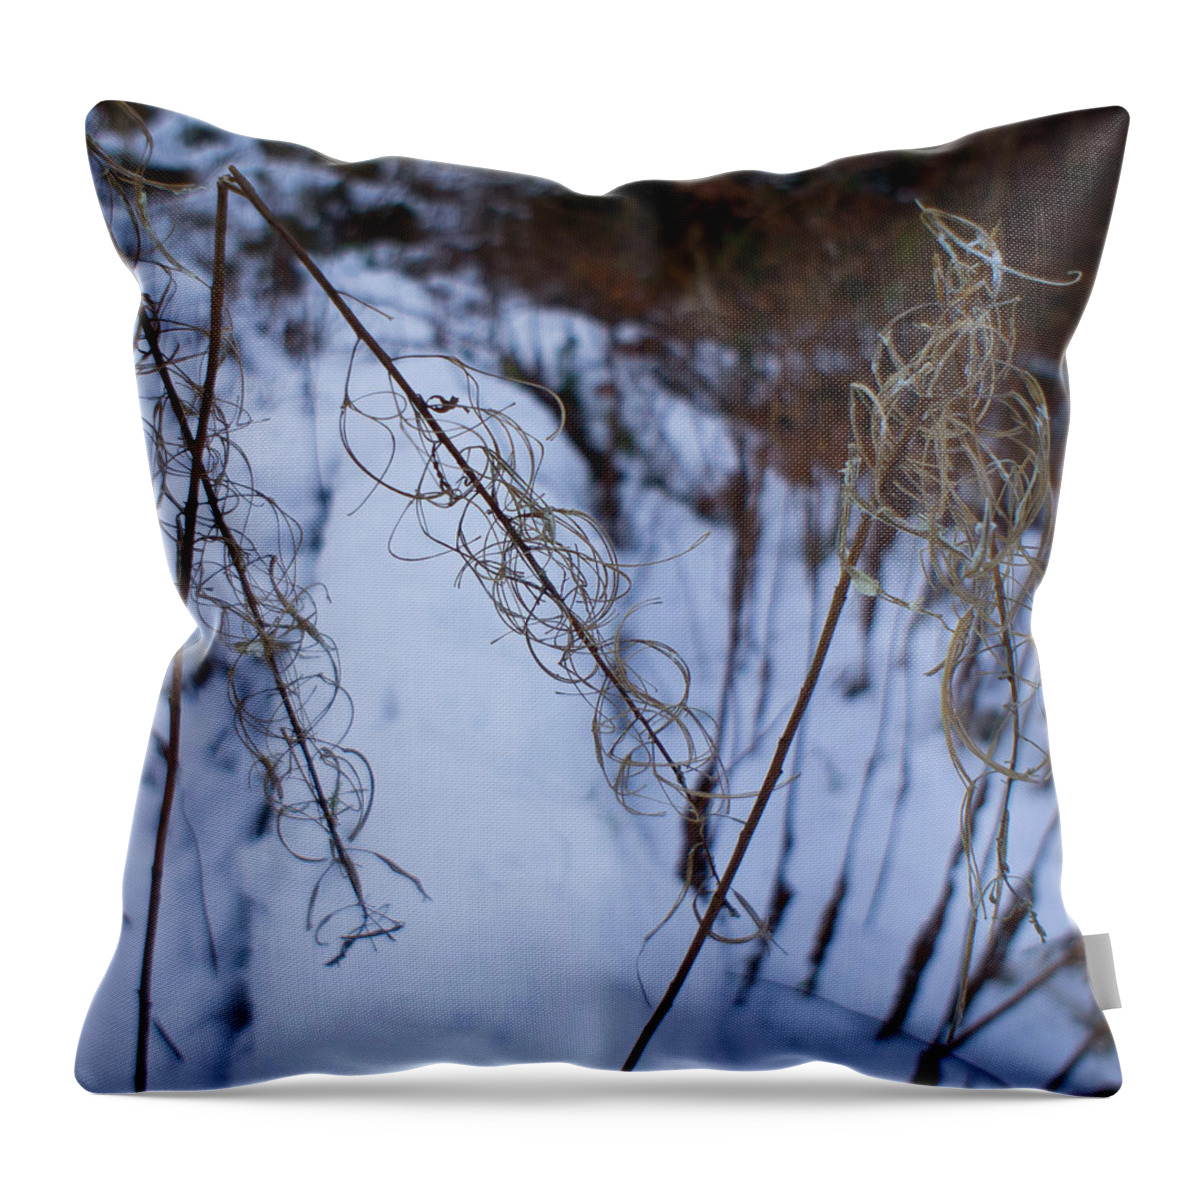 Rosebay Willowherb Throw Pillow featuring the photograph Winter of Fireweed by Elena Perelman